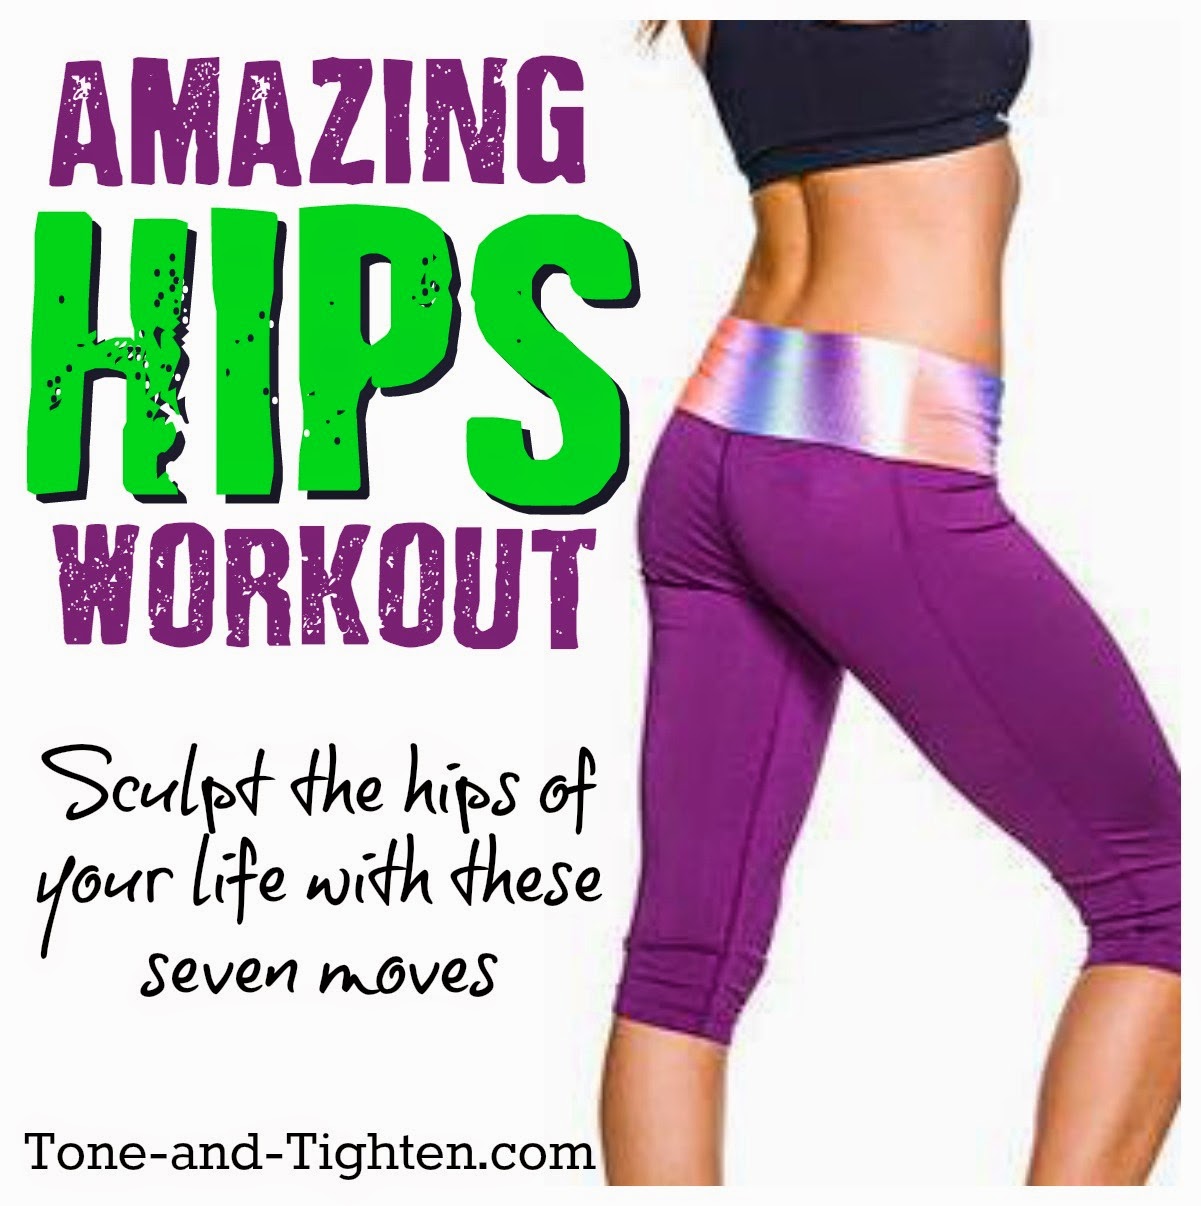 Amazing hips workout to strengthen, sculpt, Tone and Tighten!